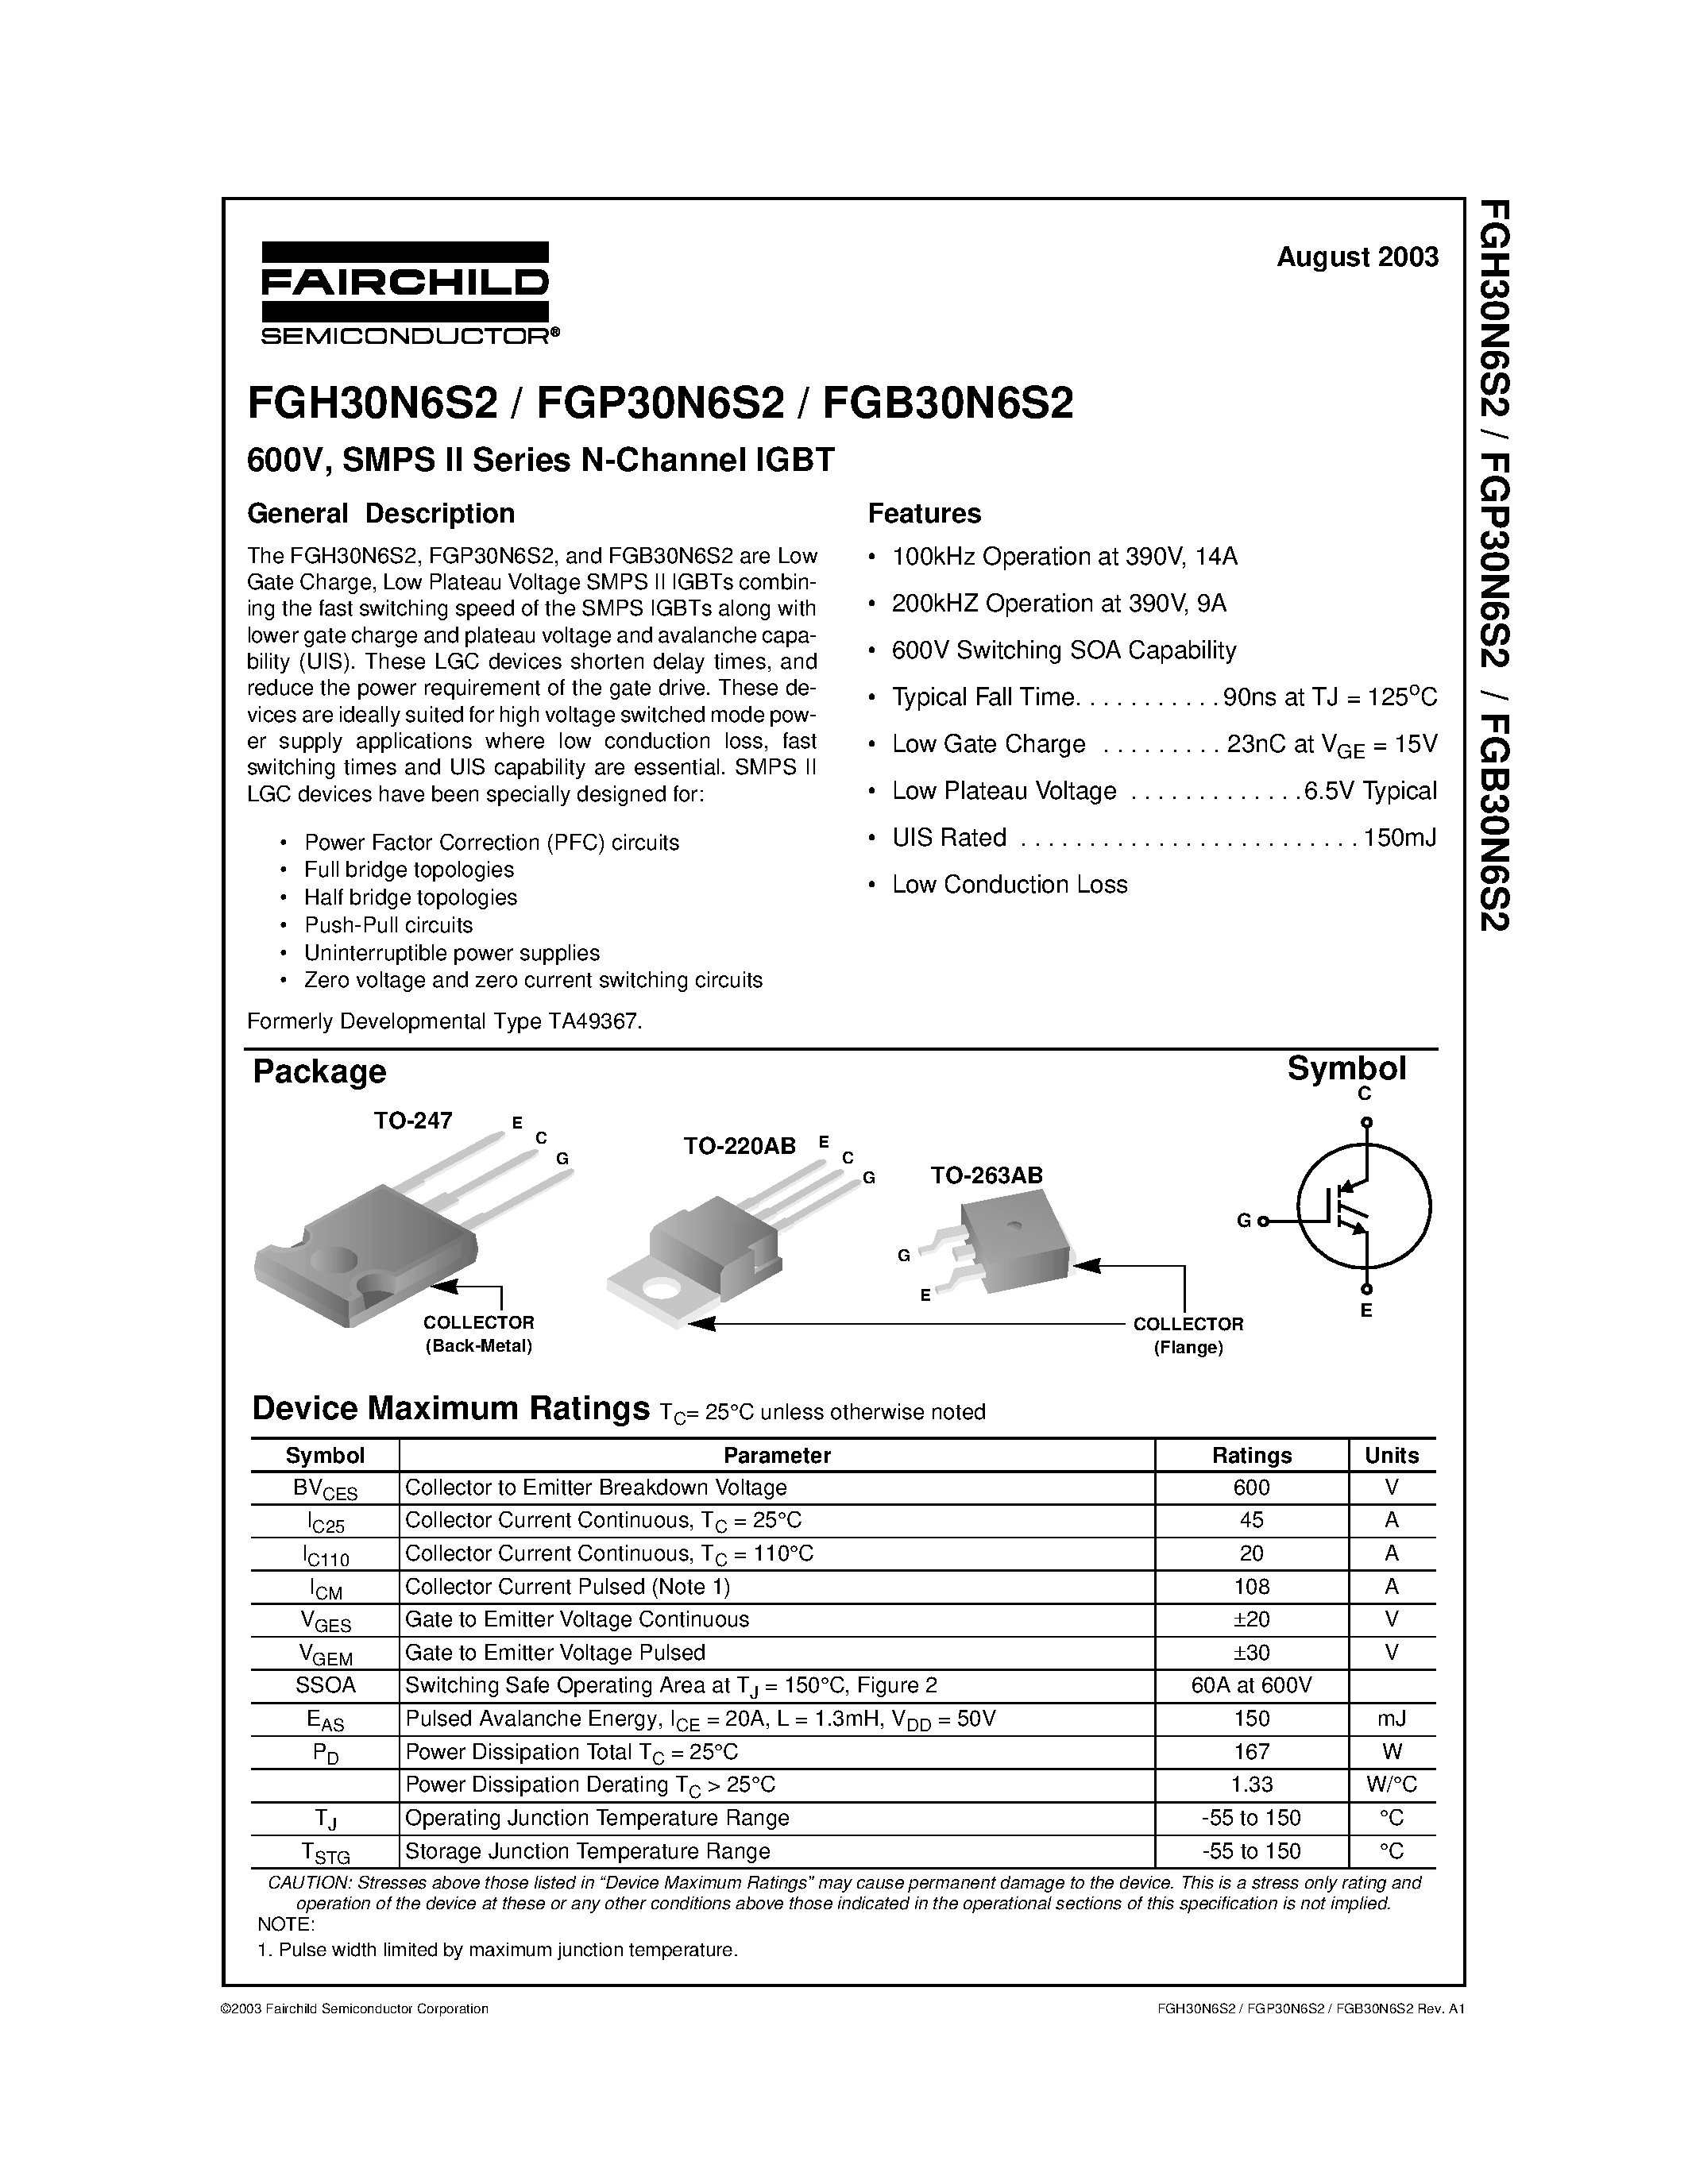 Datasheet FGB30N6S2 - 600V/ SMPS II Series N-Channel IGBT page 1